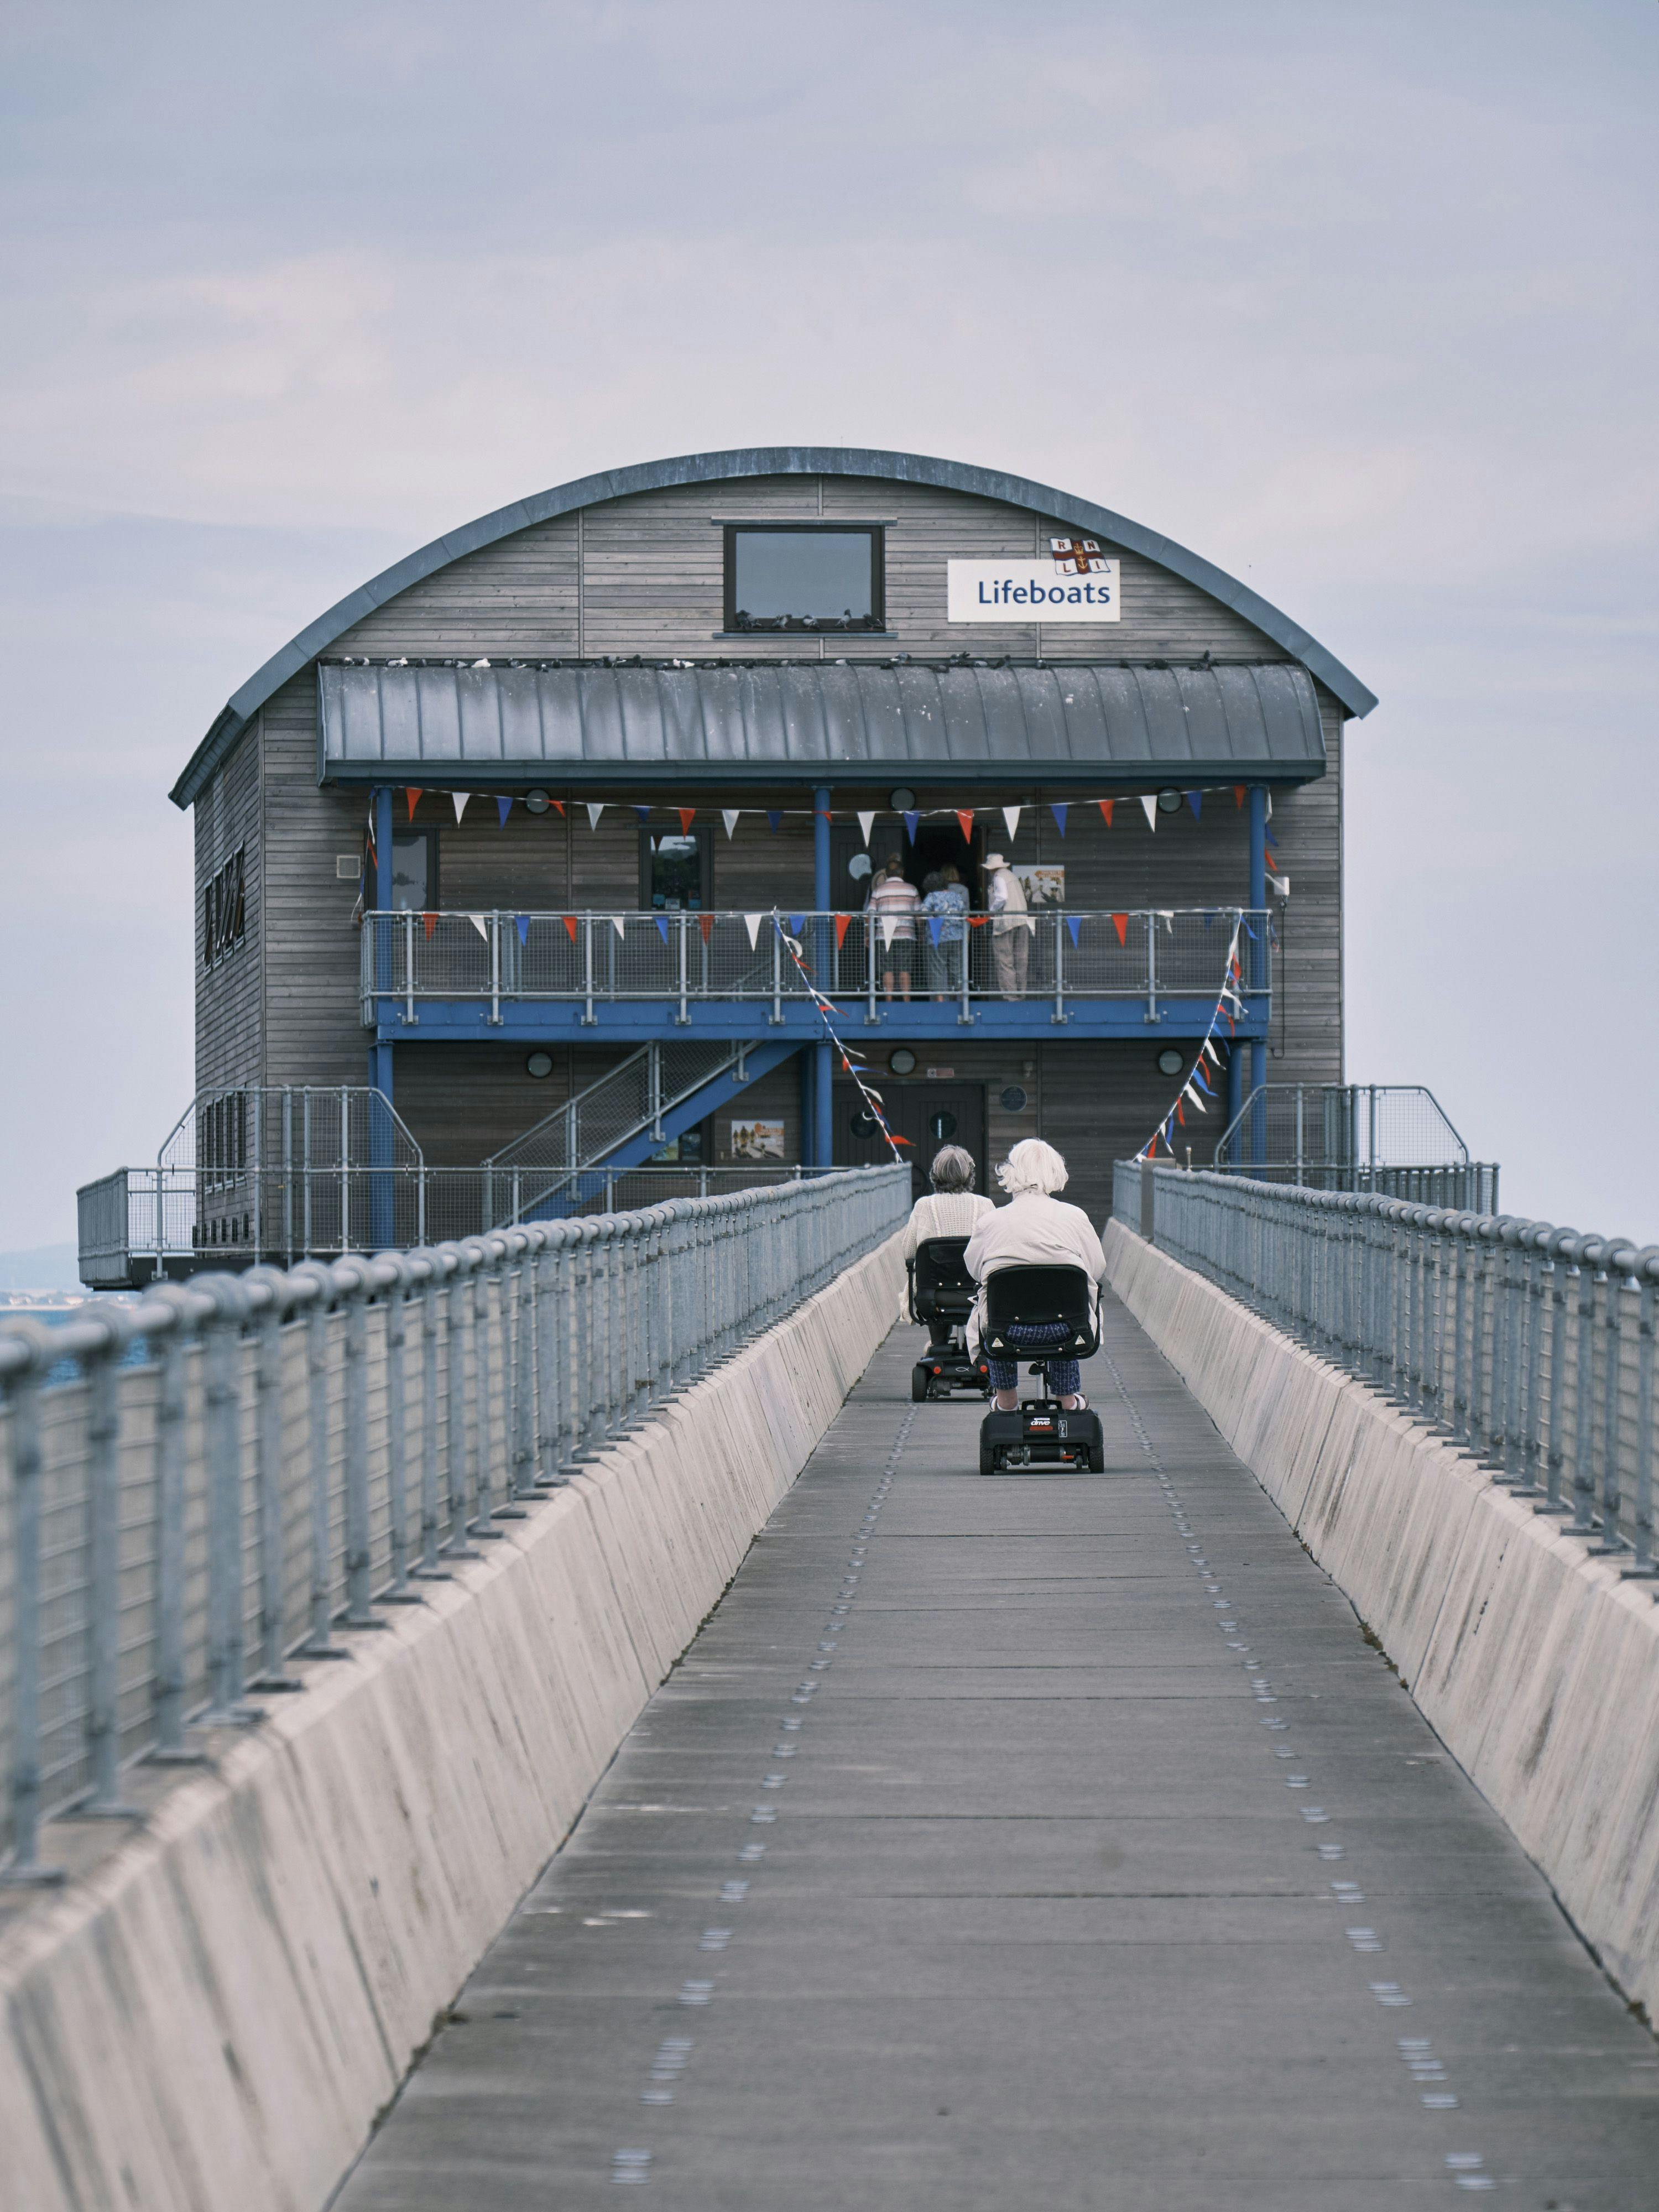 Two mobility scooters drive up a pier towards a lifeboat station